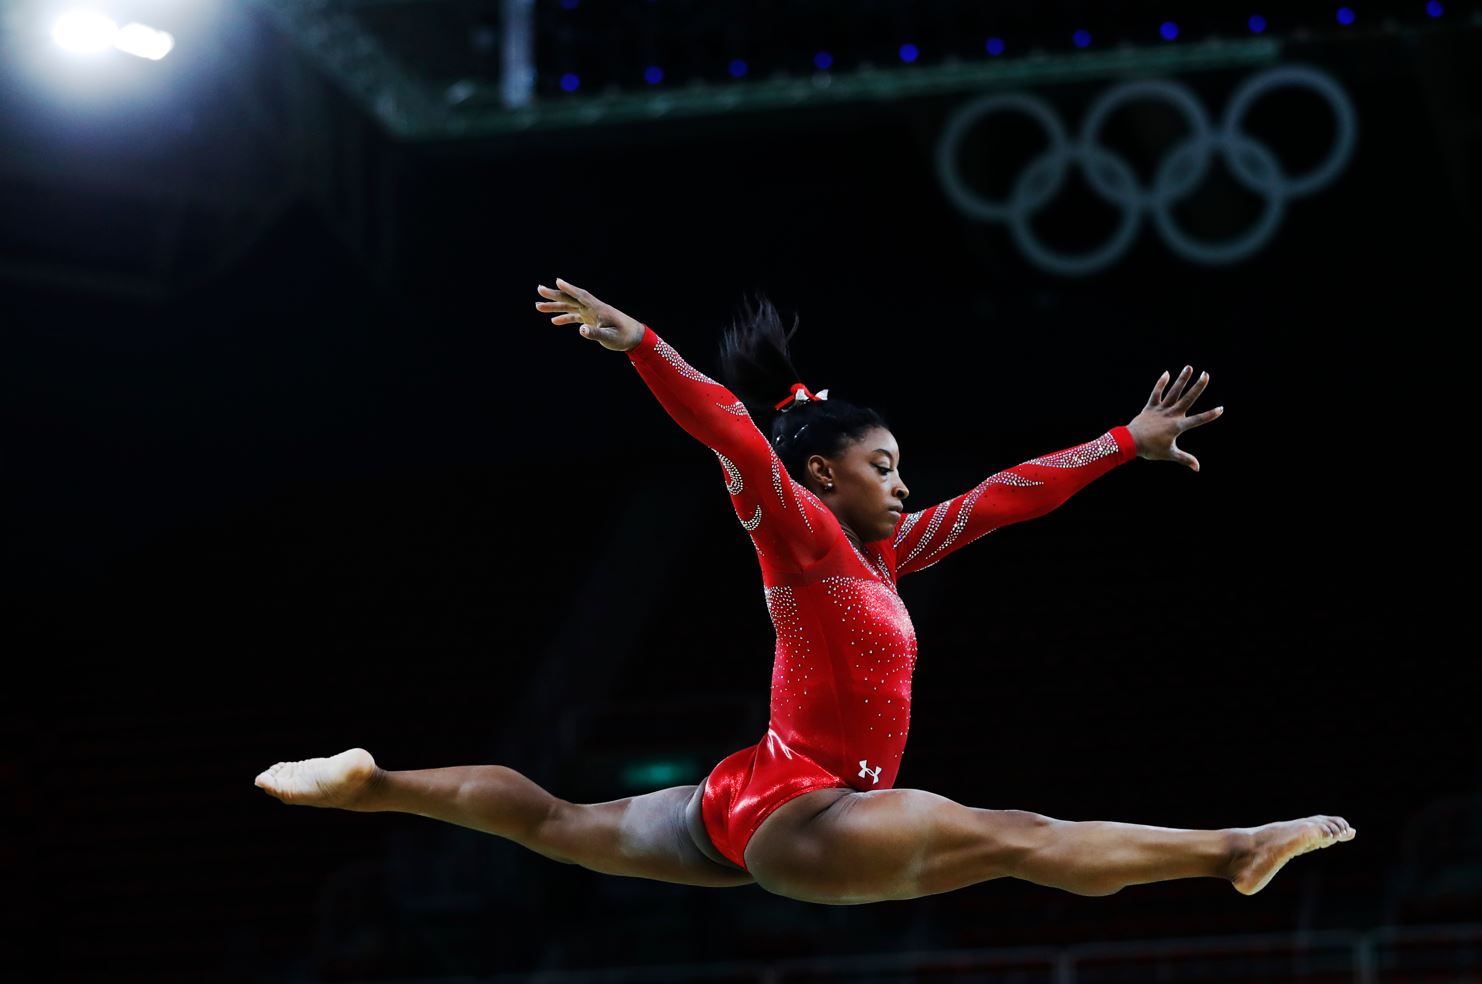 Simone Biles took part in the Rio 2016 Summer Olympic Games